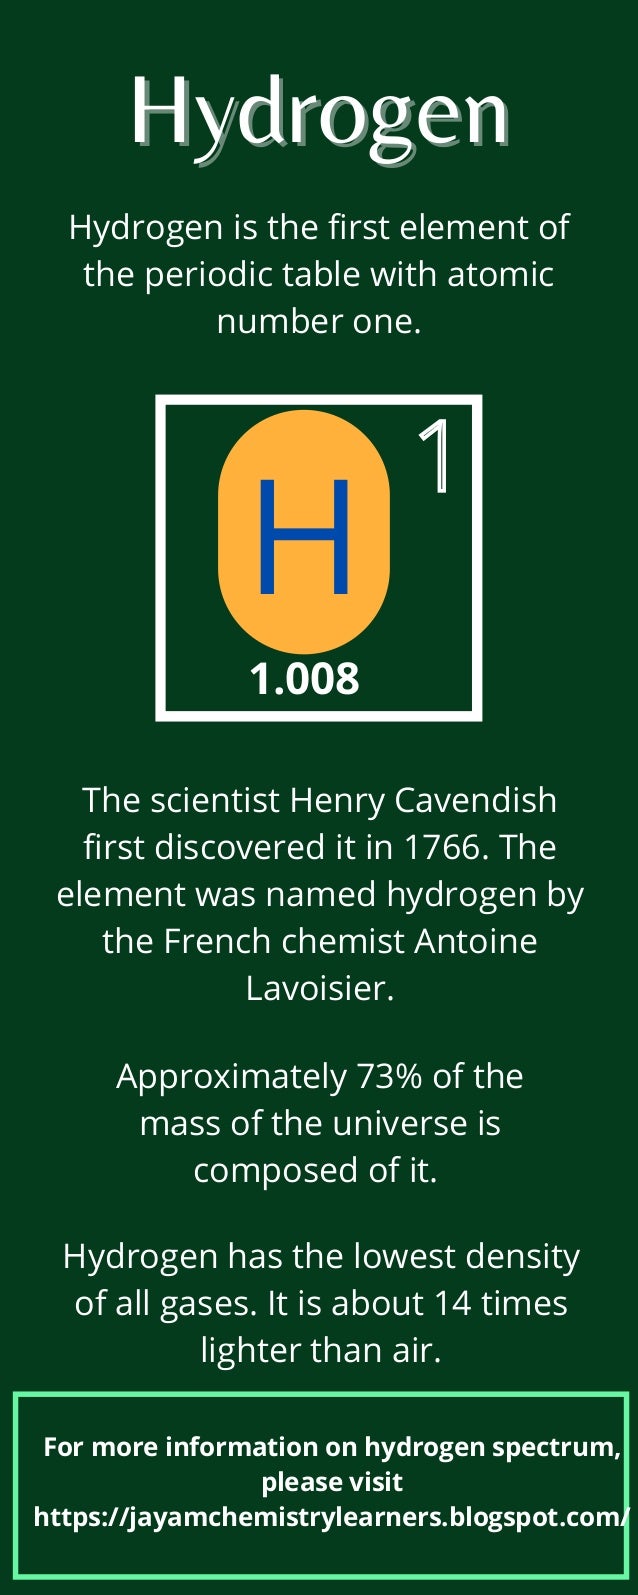 Hydrogen
Hydrogen
Hydrogen is the first element of
the periodic table with atomic
number one.
H
1.008
1
The scientist Henry Cavendish
first discovered it in 1766. The
element was named hydrogen by
the French chemist Antoine
Lavoisier.


Approximately 73% of the
mass of the universe is
composed of it.
Hydrogen has the lowest density
of all gases. It is about 14 times
lighter than air.


For more information on hydrogen spectrum,
please visit
https://jayamchemistrylearners.blogspot.com/
 